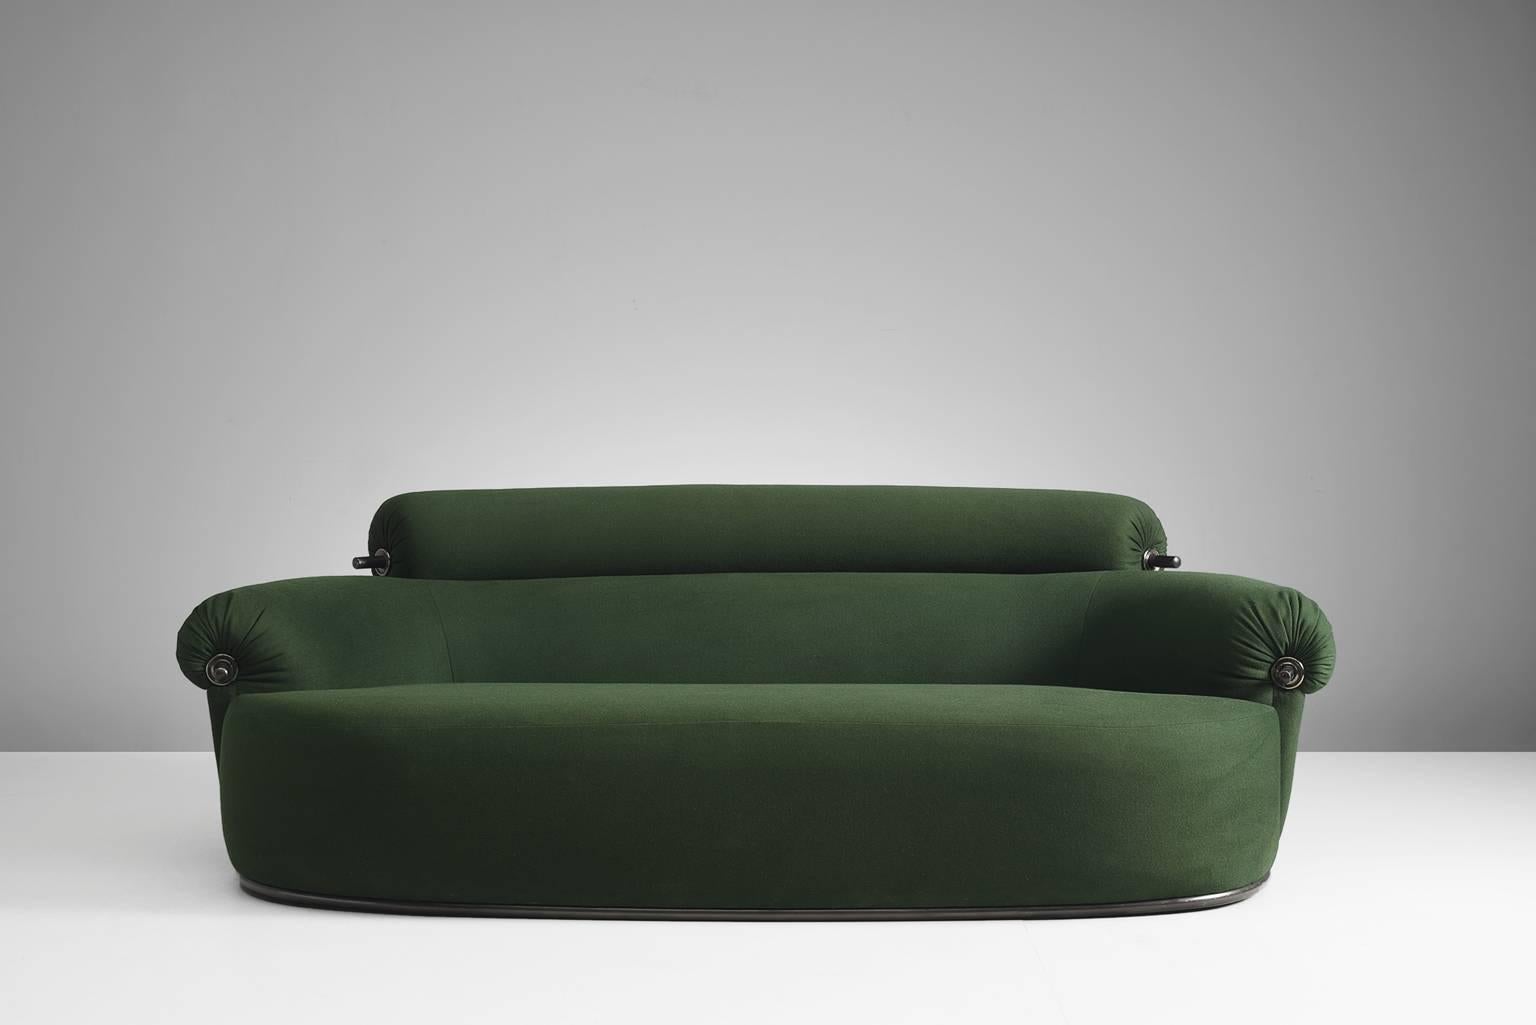 Luigi Caccia Dominioni for Azucena, toro sofa, green fabric, Italy, circa 1960

This sofa model 'P20B Toro' is produced by Azucena. The sofa is designed by Luigi Caccio Dominioni in Milan. The sofa is nicknamed Toro which is used because of